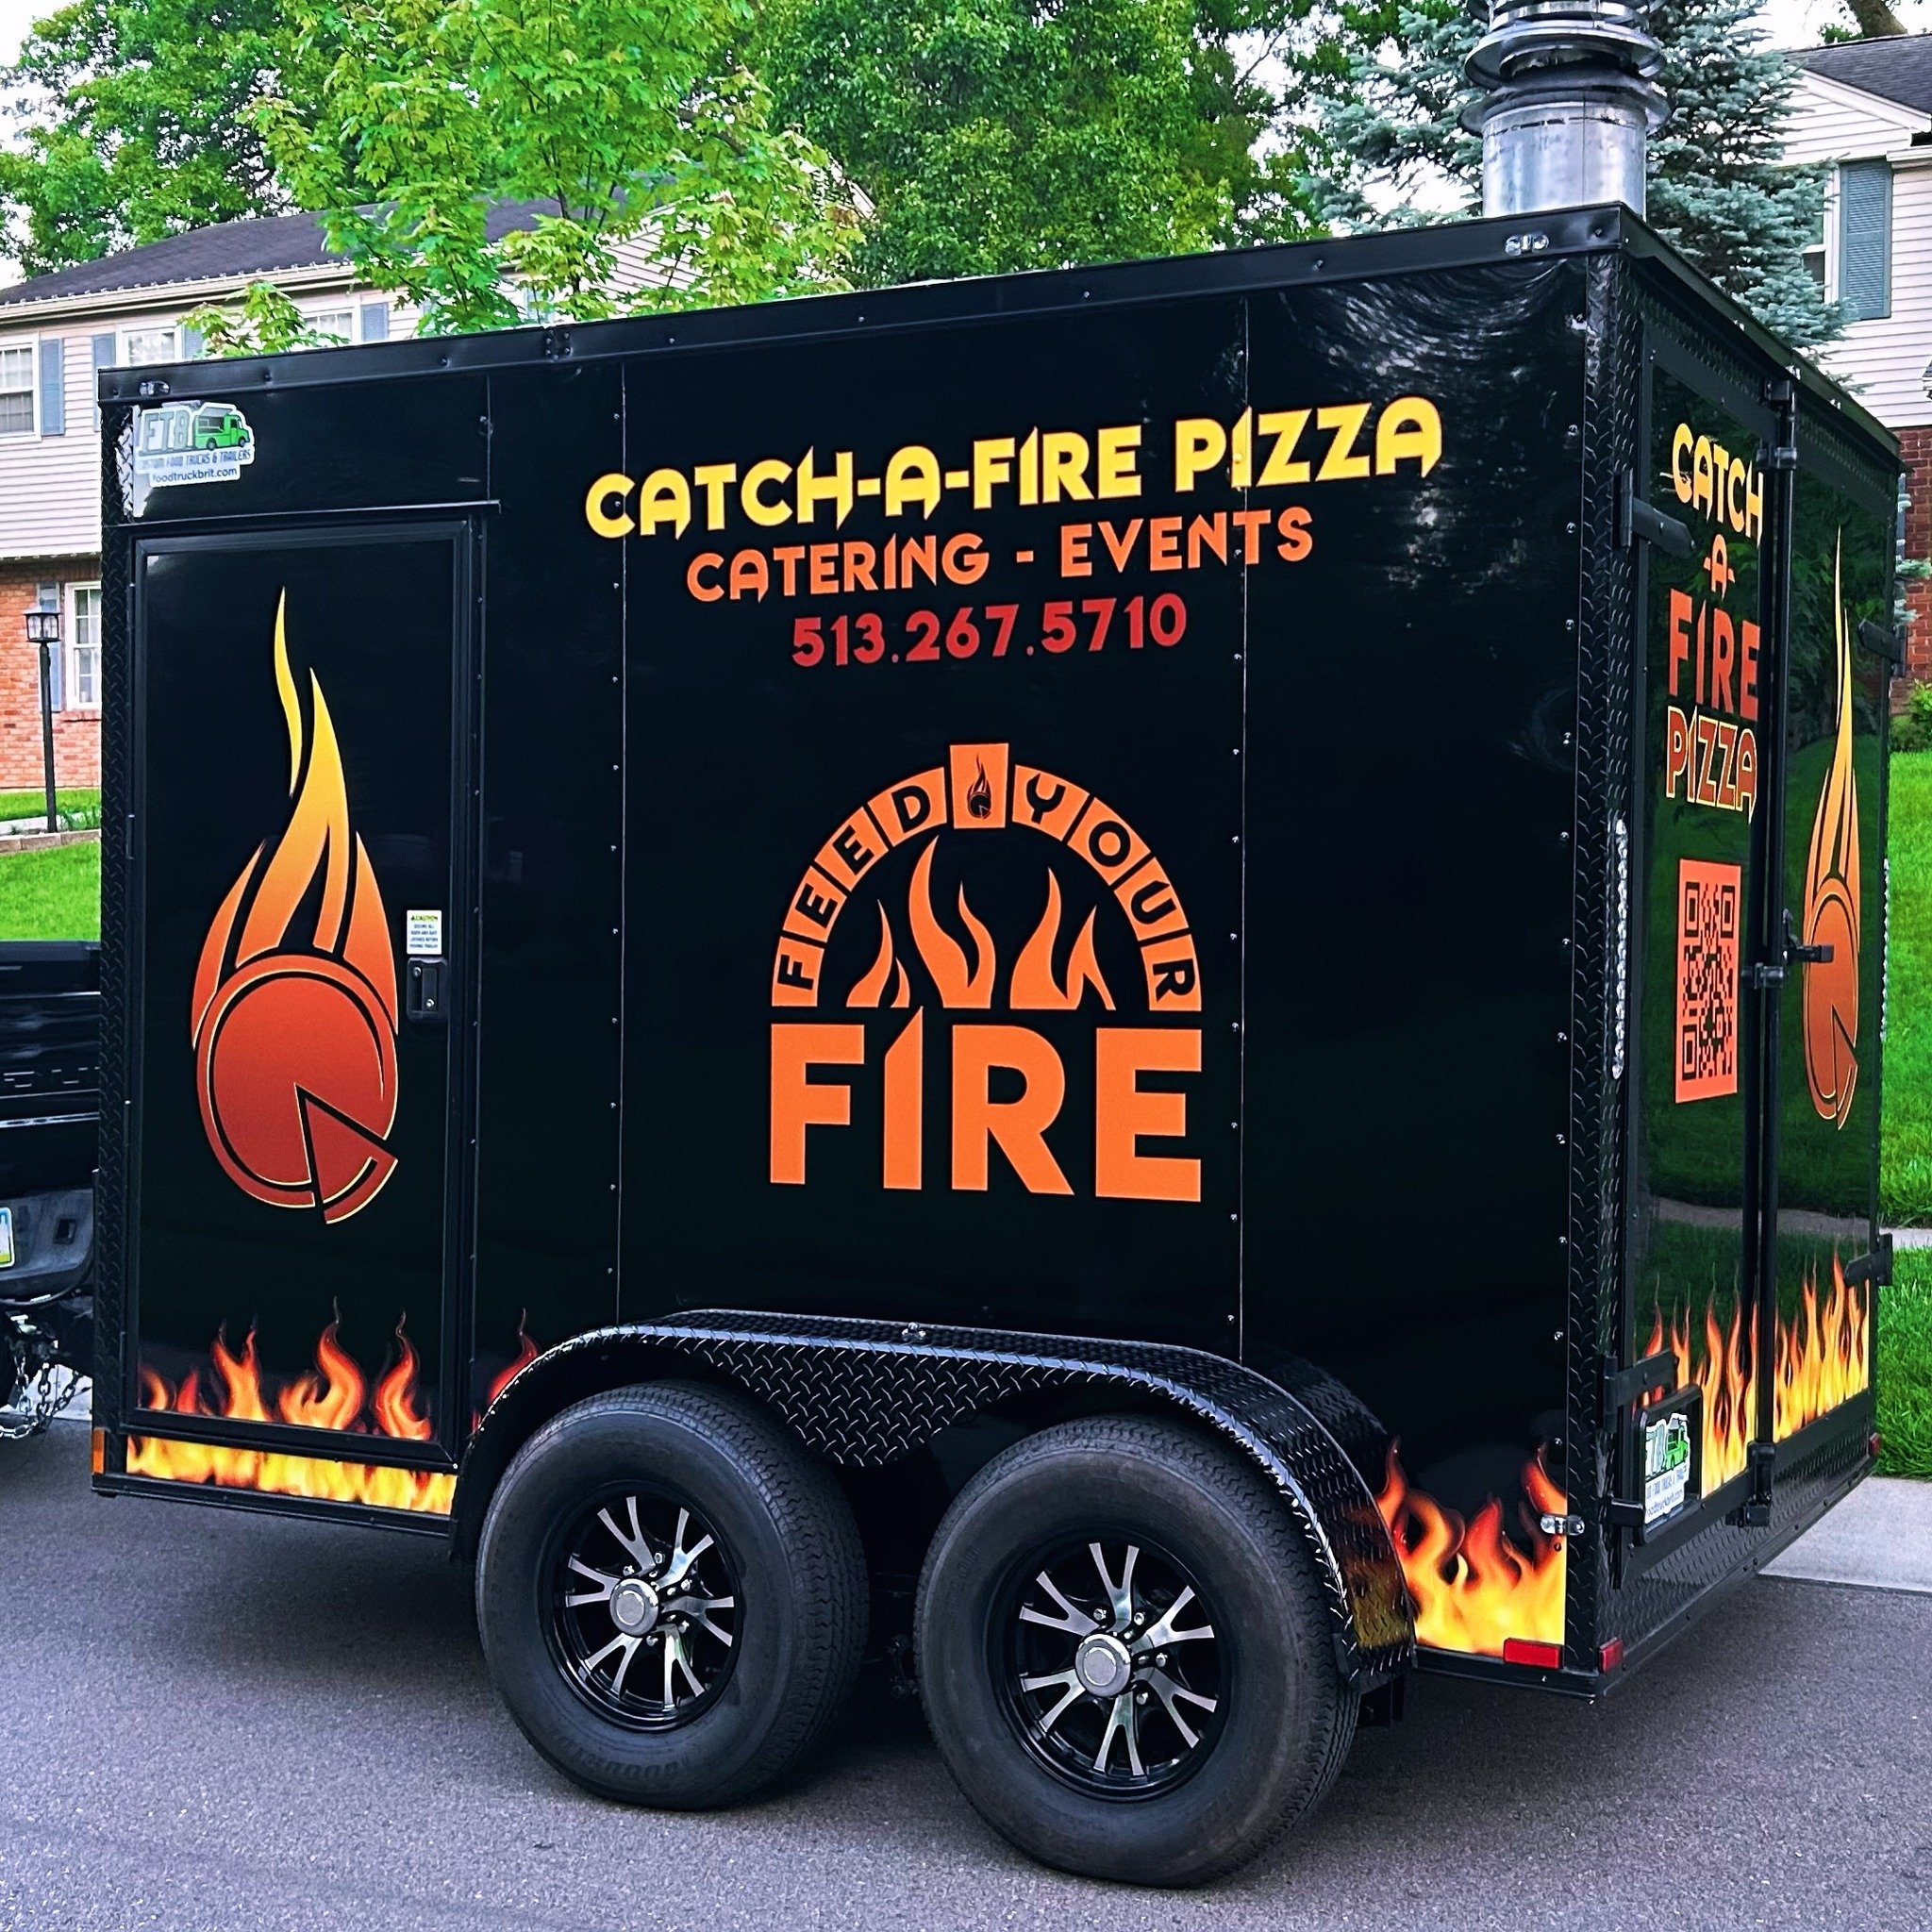 Yes, we&rsquo;re taking the best #woodfirepizza on the road again! Come see our new trailer @tasteofcincinnati and sample some of our tasty offerings Memorial Day weekend! 🍕🔥🇺🇸